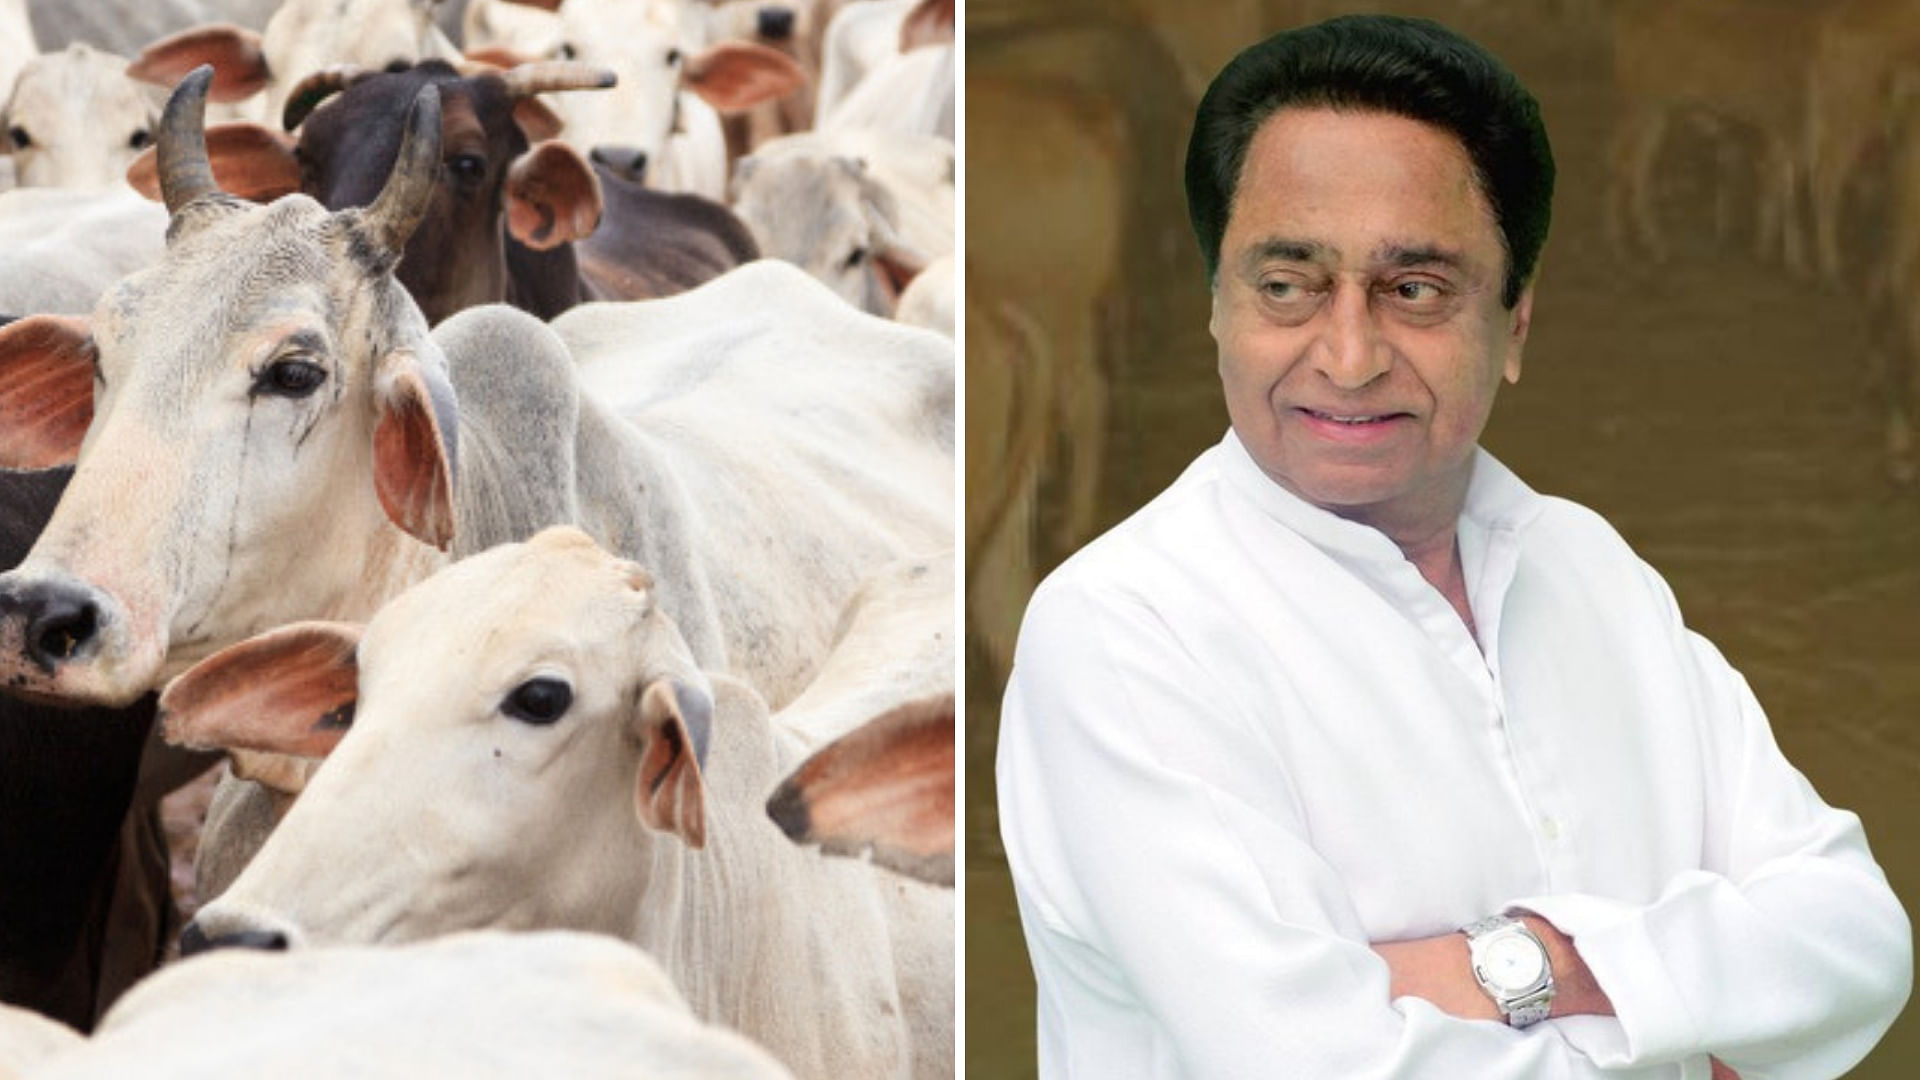 MP Congress President Kamal Nath, apparently taking a leaf from the Bharatiya Janata Party, promised to build Gau shalas across the state, if the Congress came to power in Madhya Pradesh.